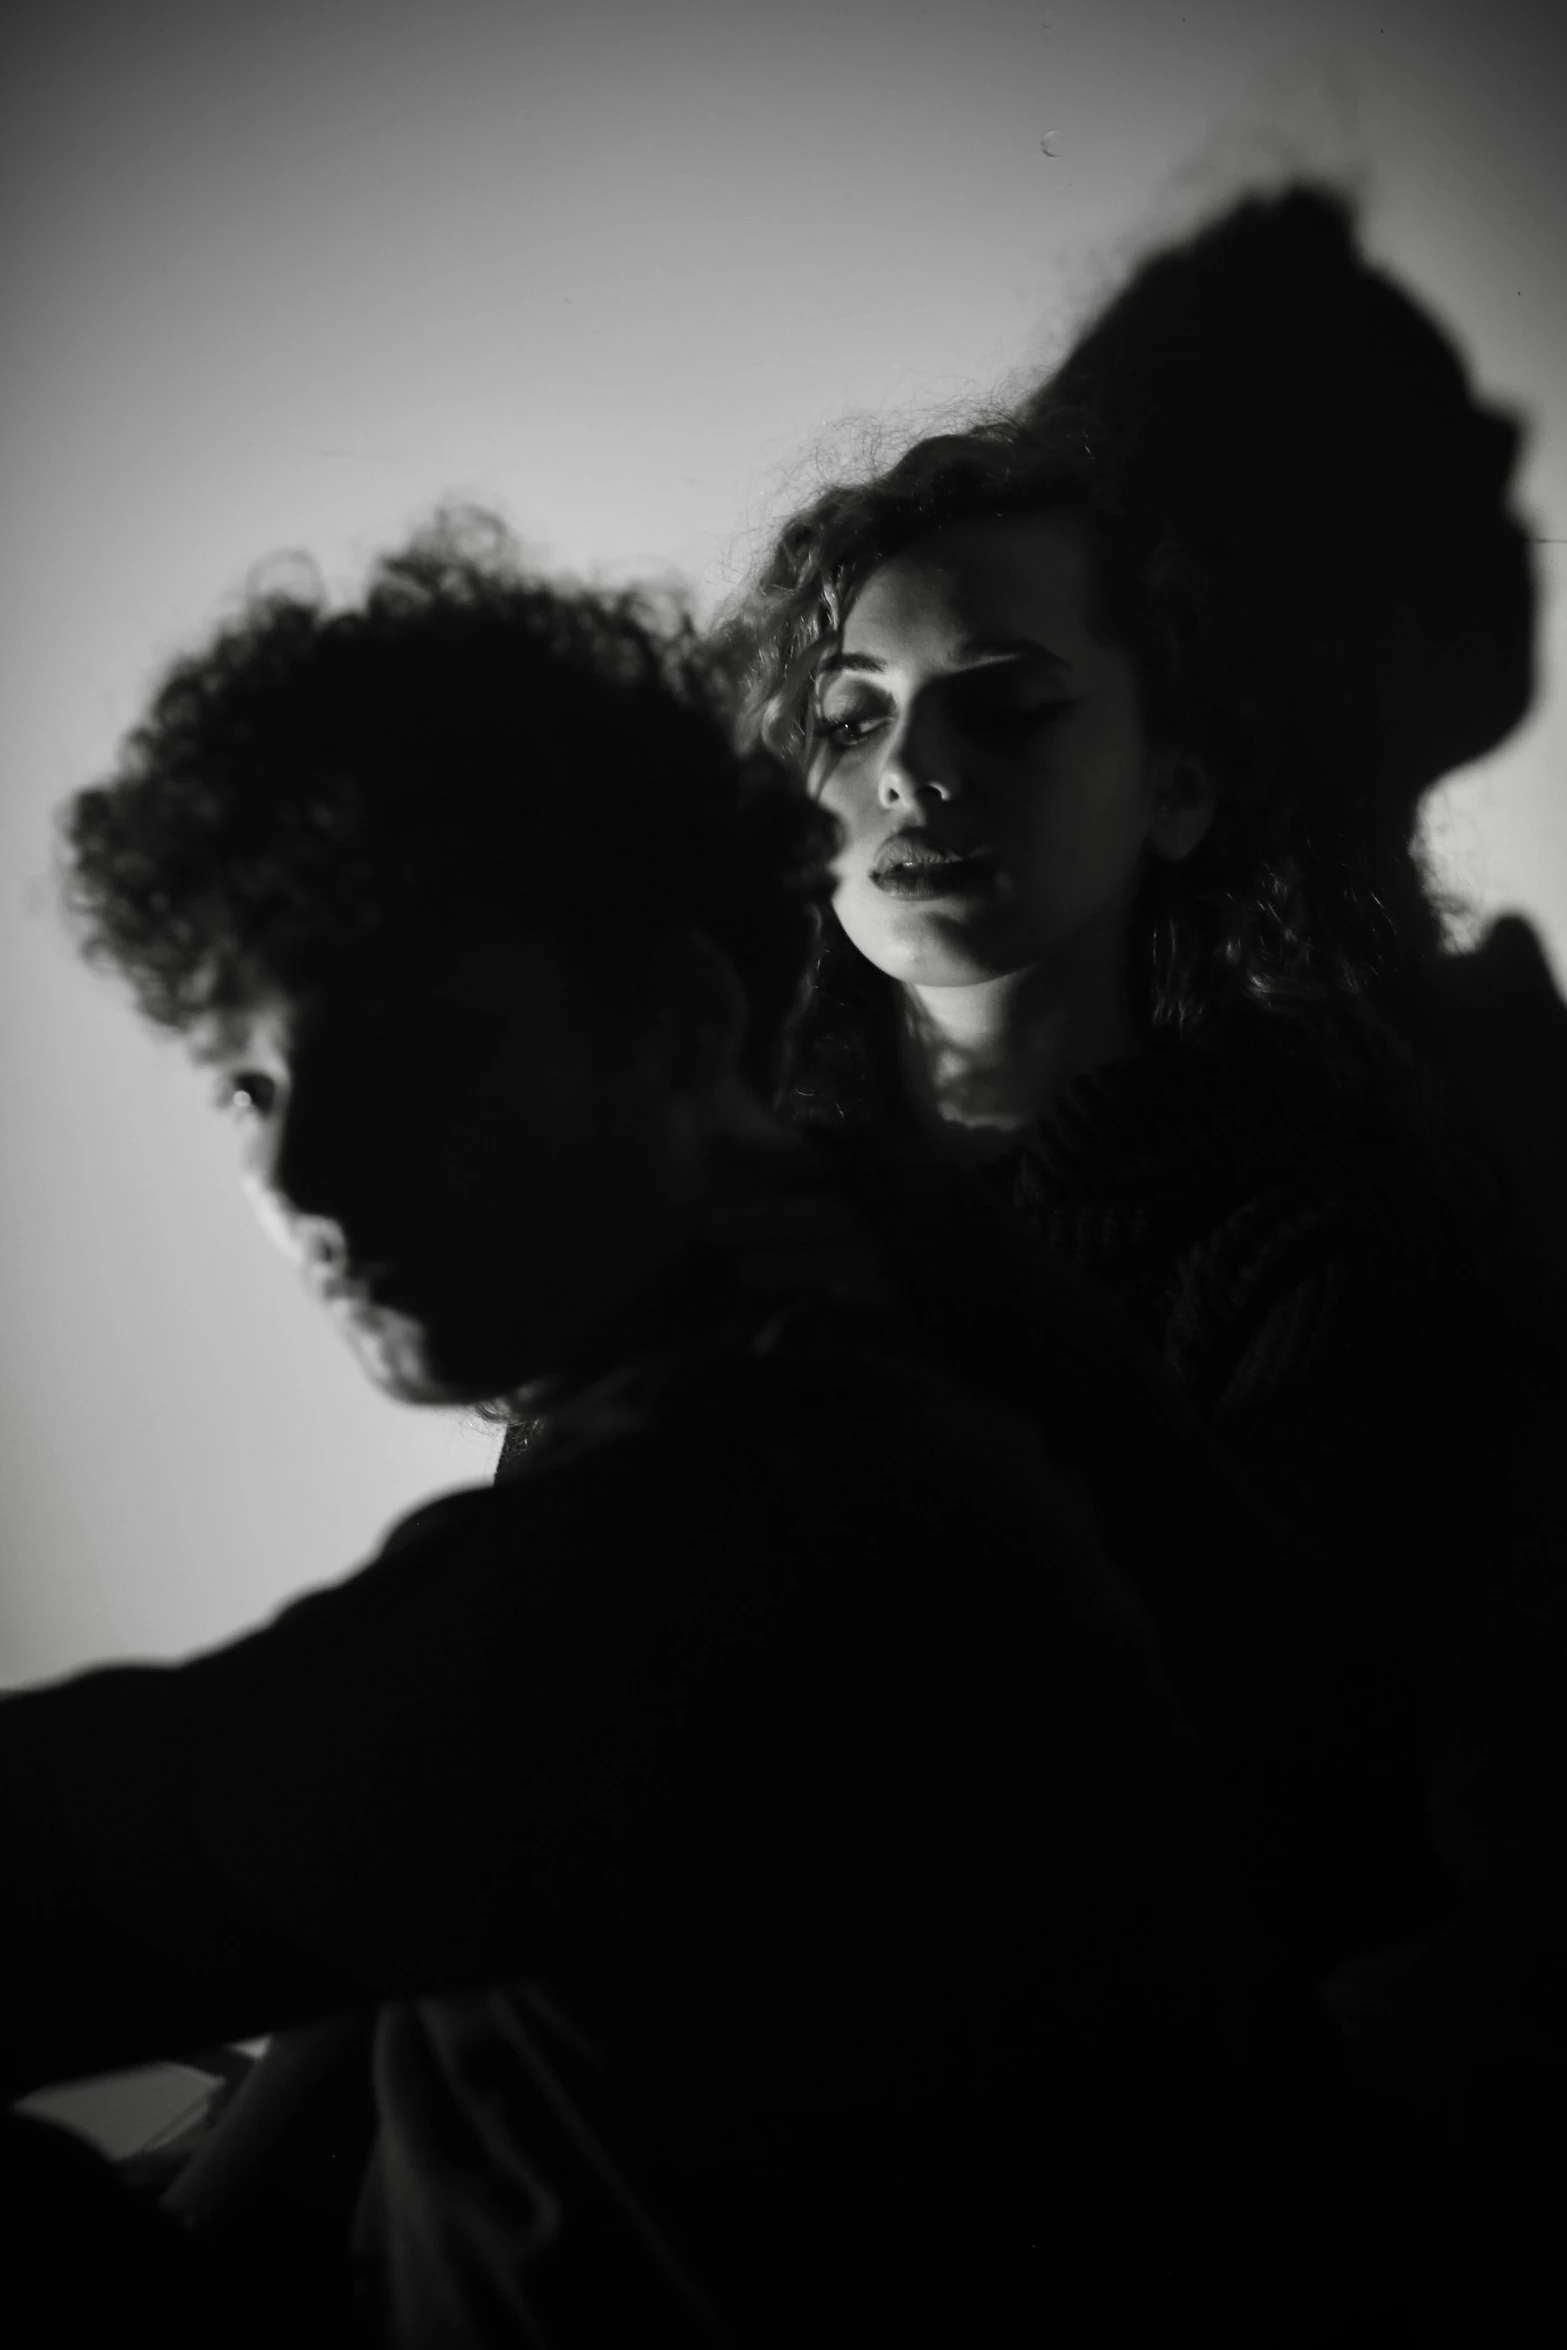 a woman with curly hair is shown leaning against the back of a man